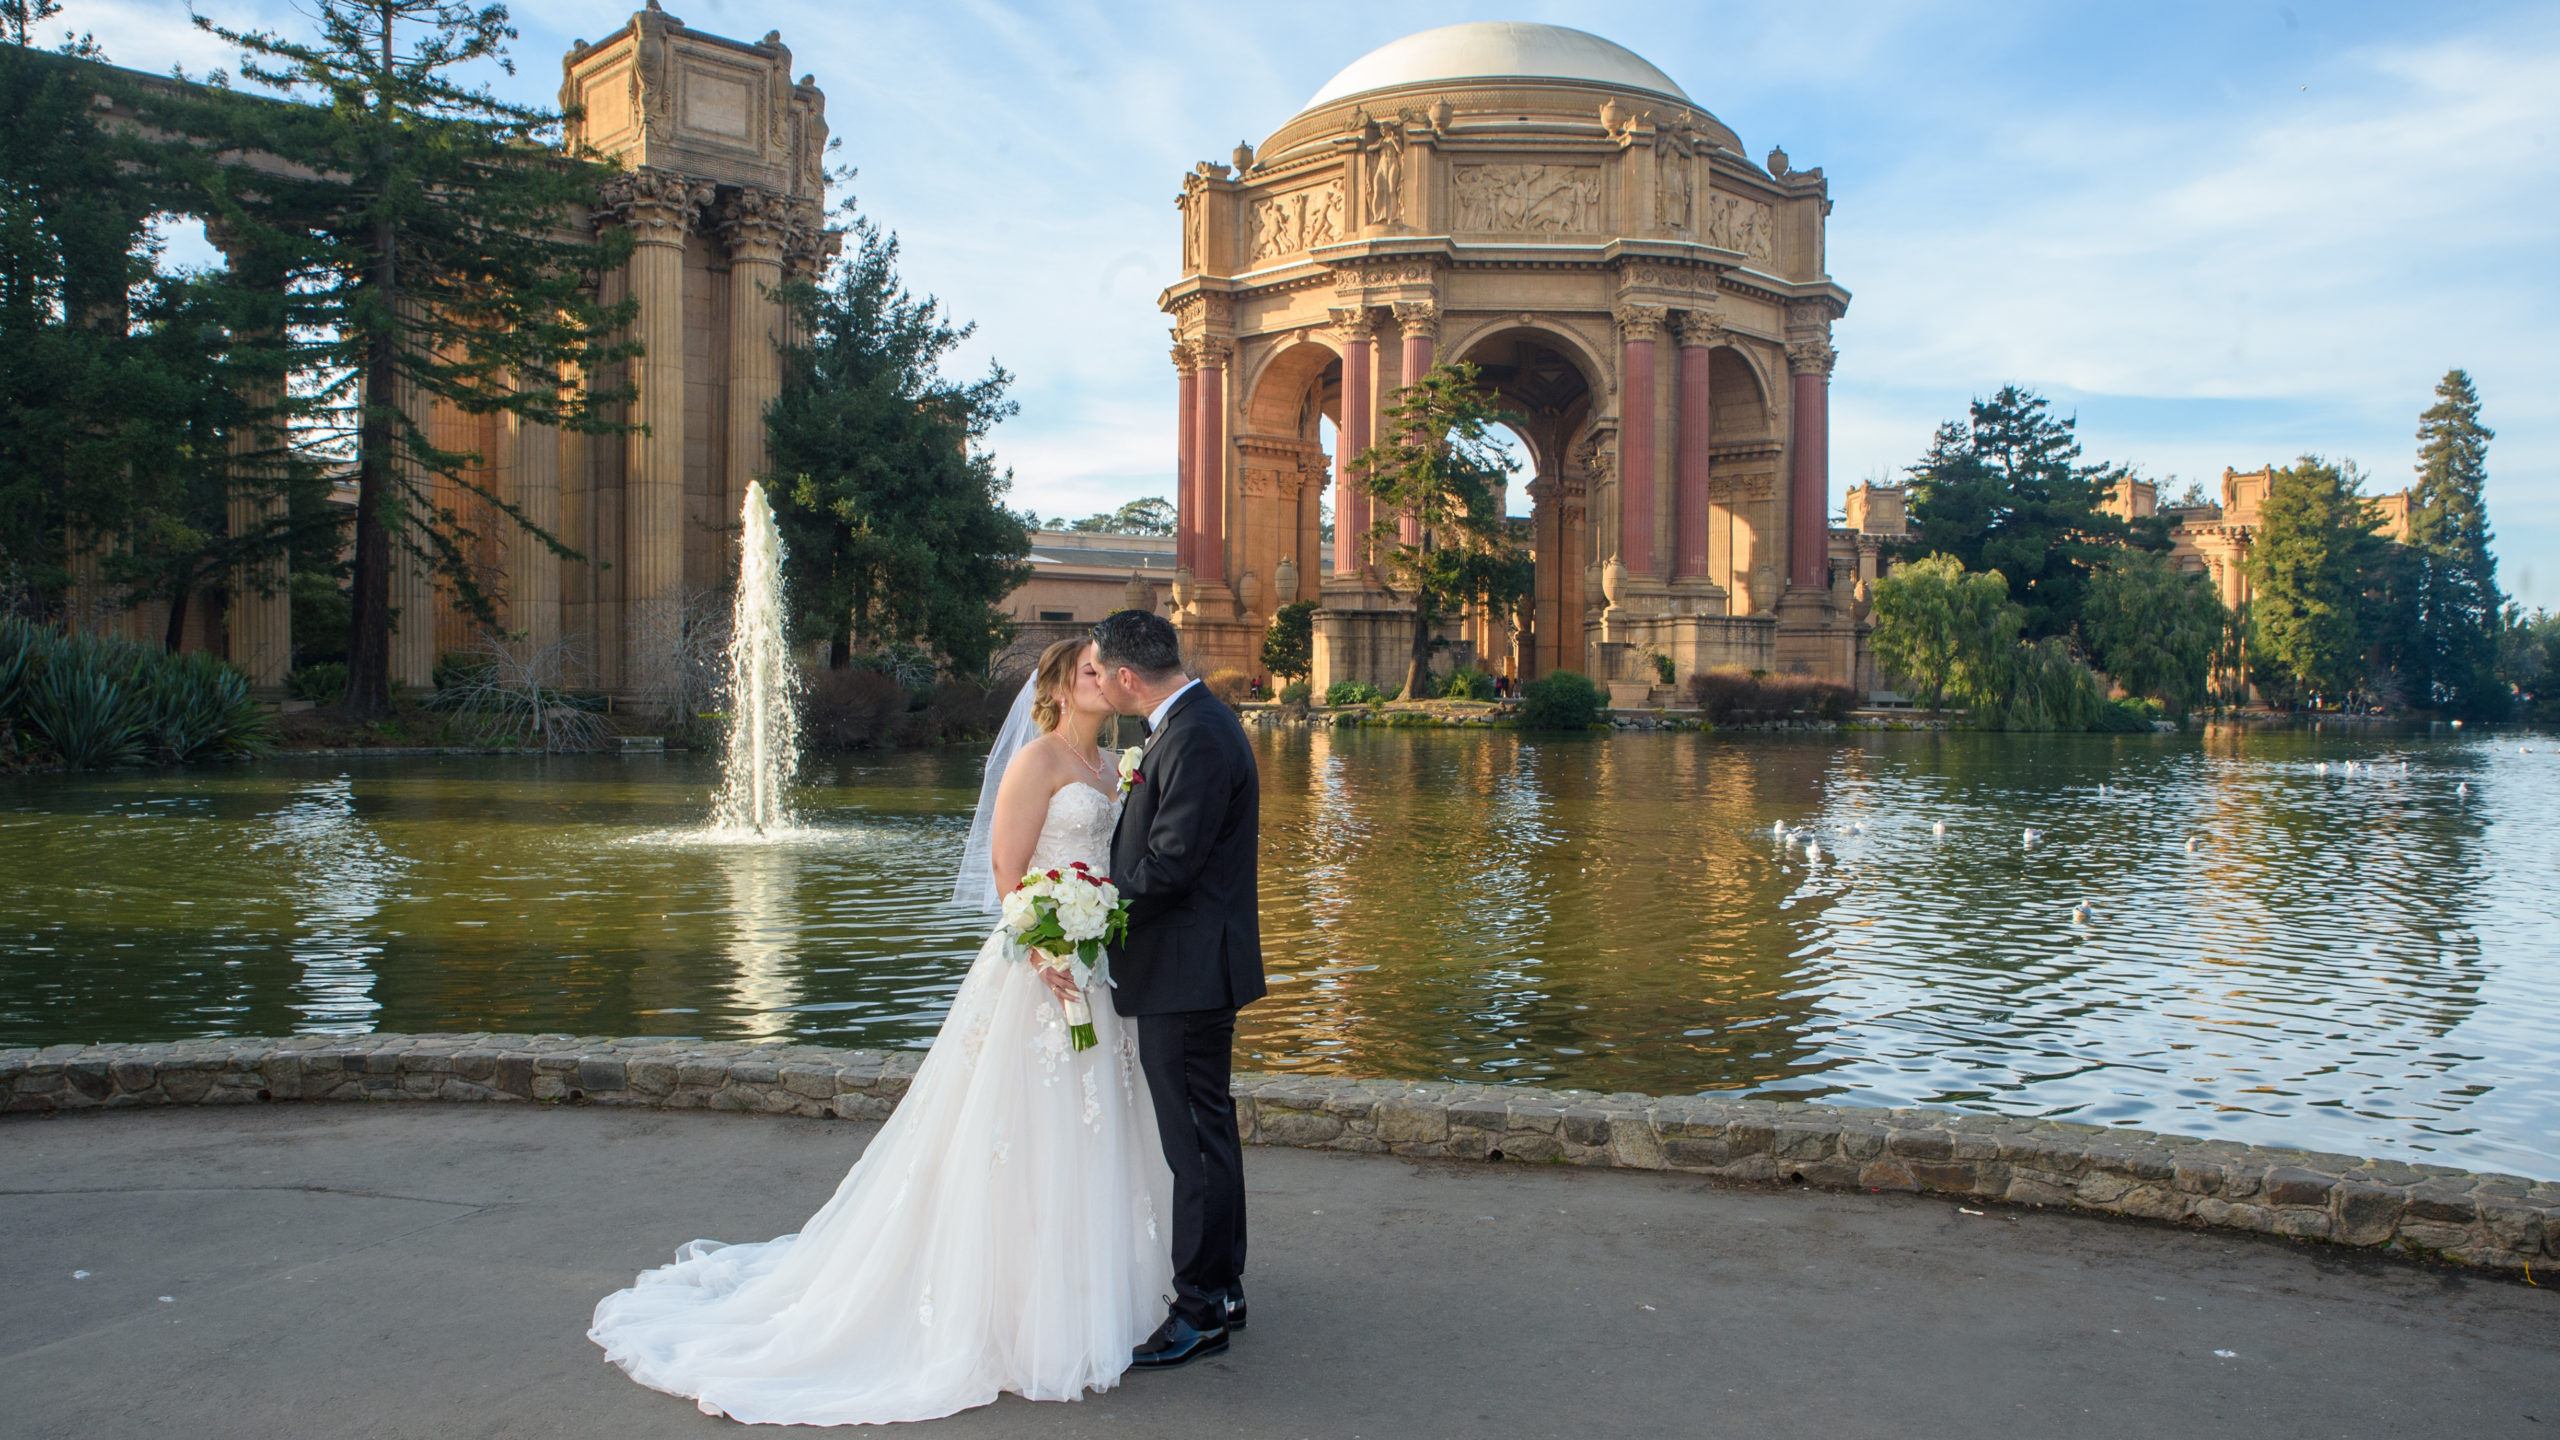 The beautiful Palace of Fine Arts in San Francisco,. A great place for wedding photography